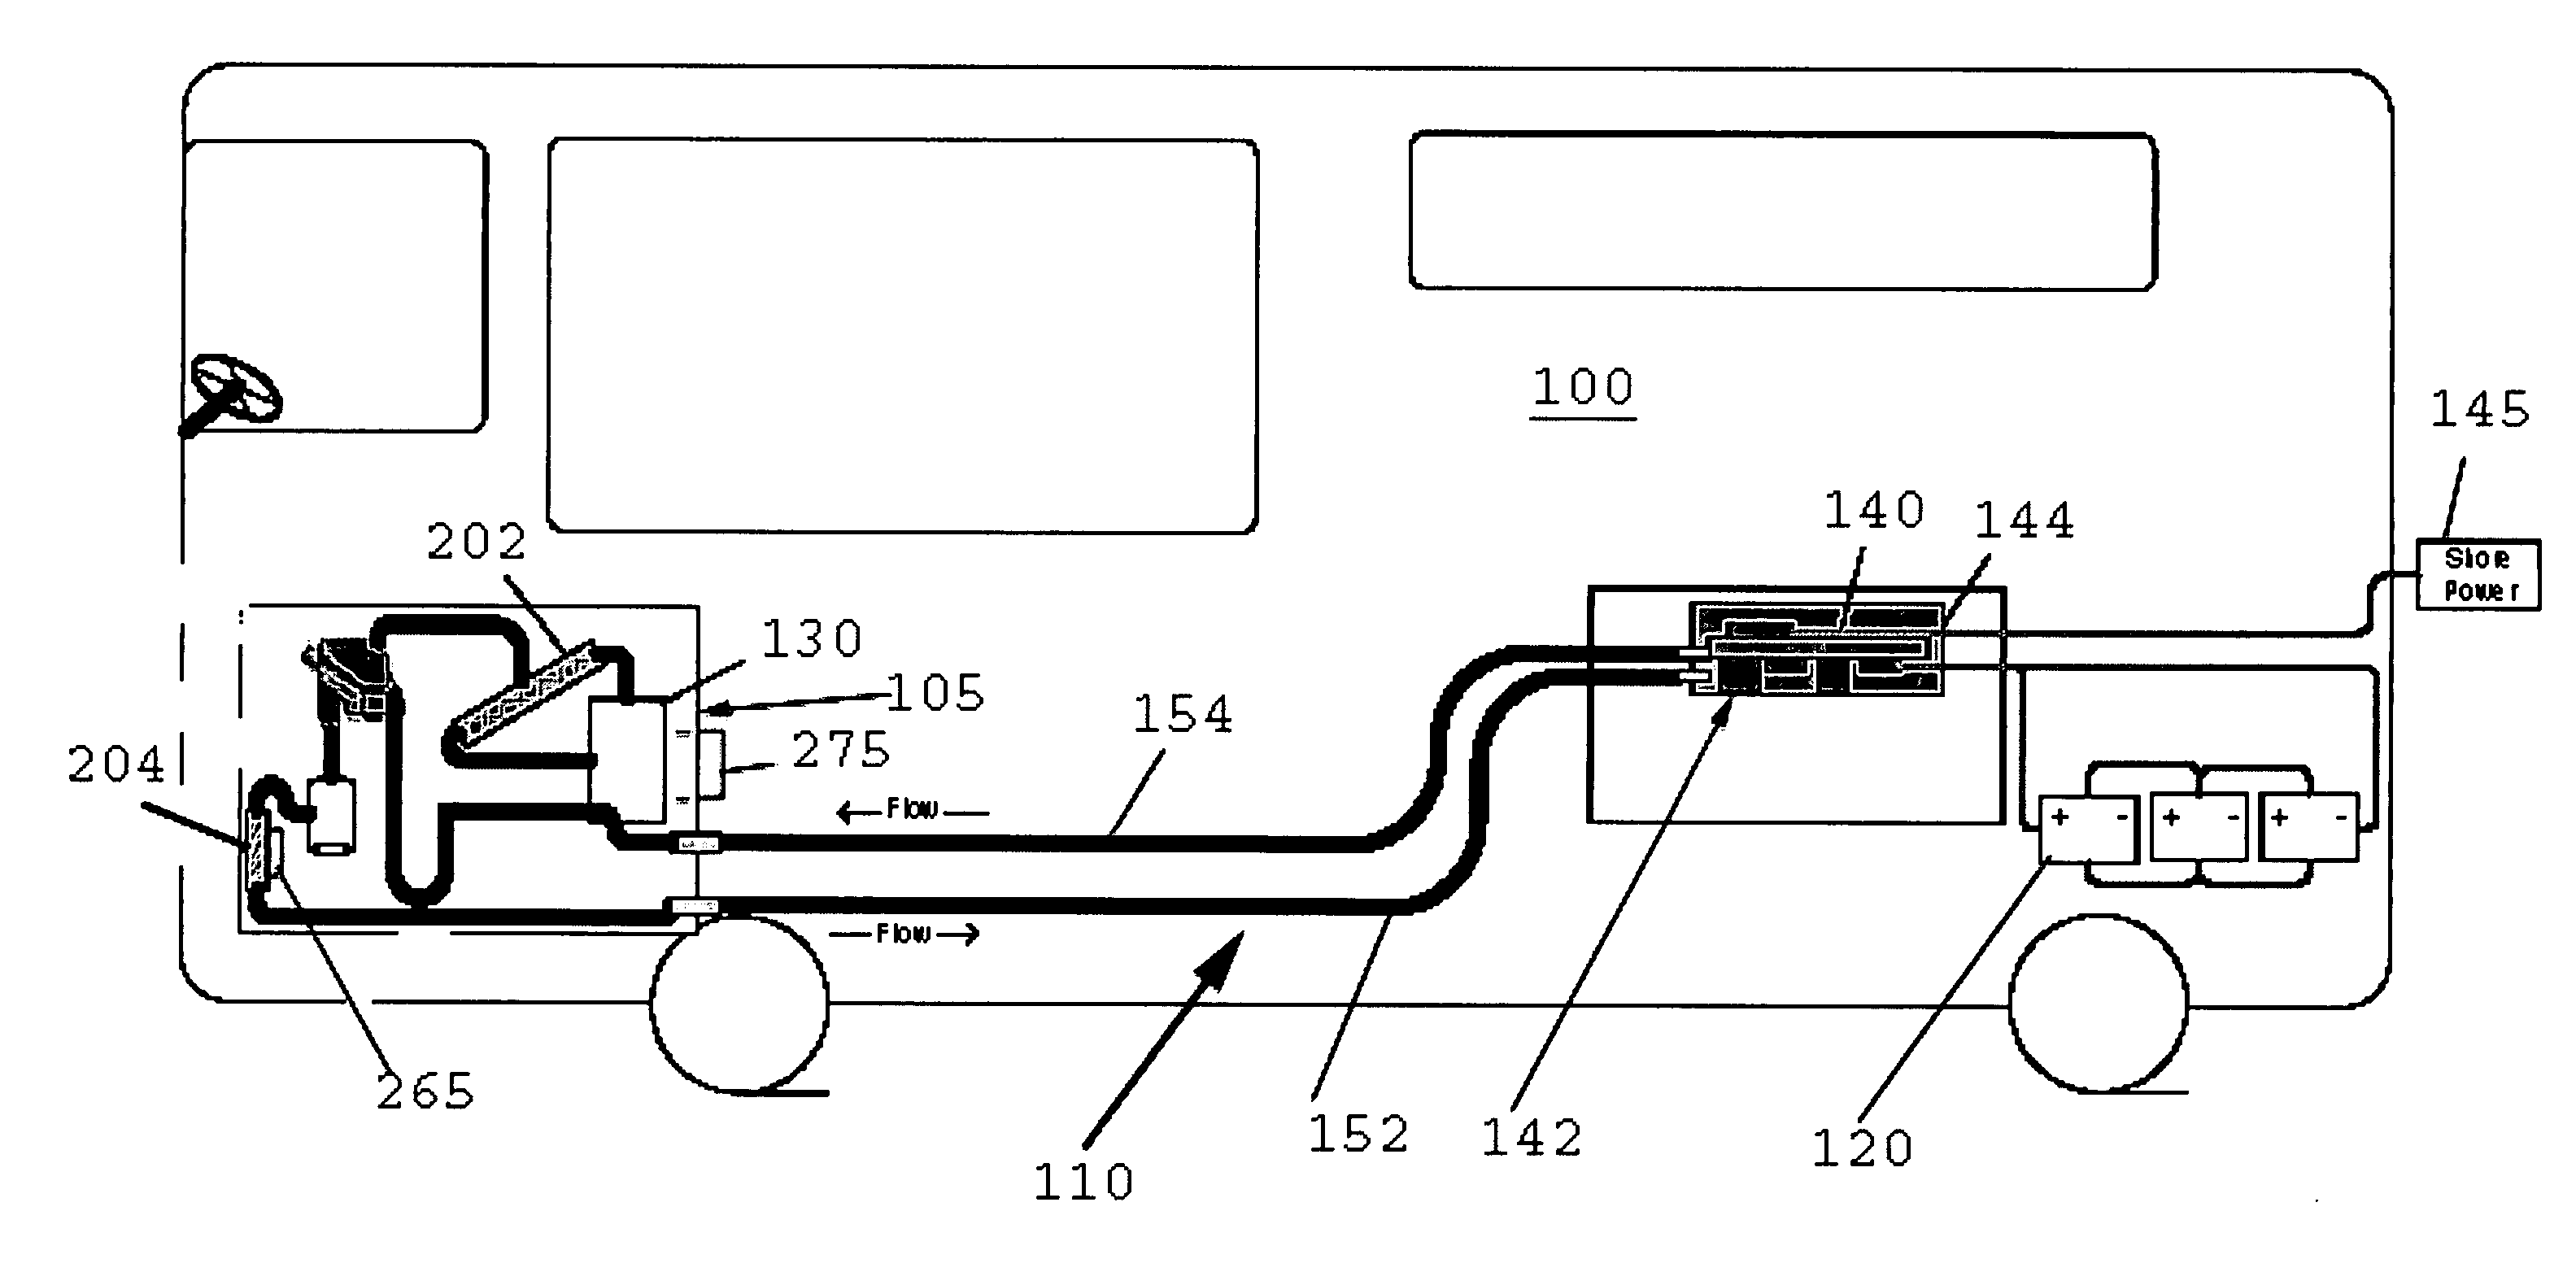 Cooling system for hybrid power system